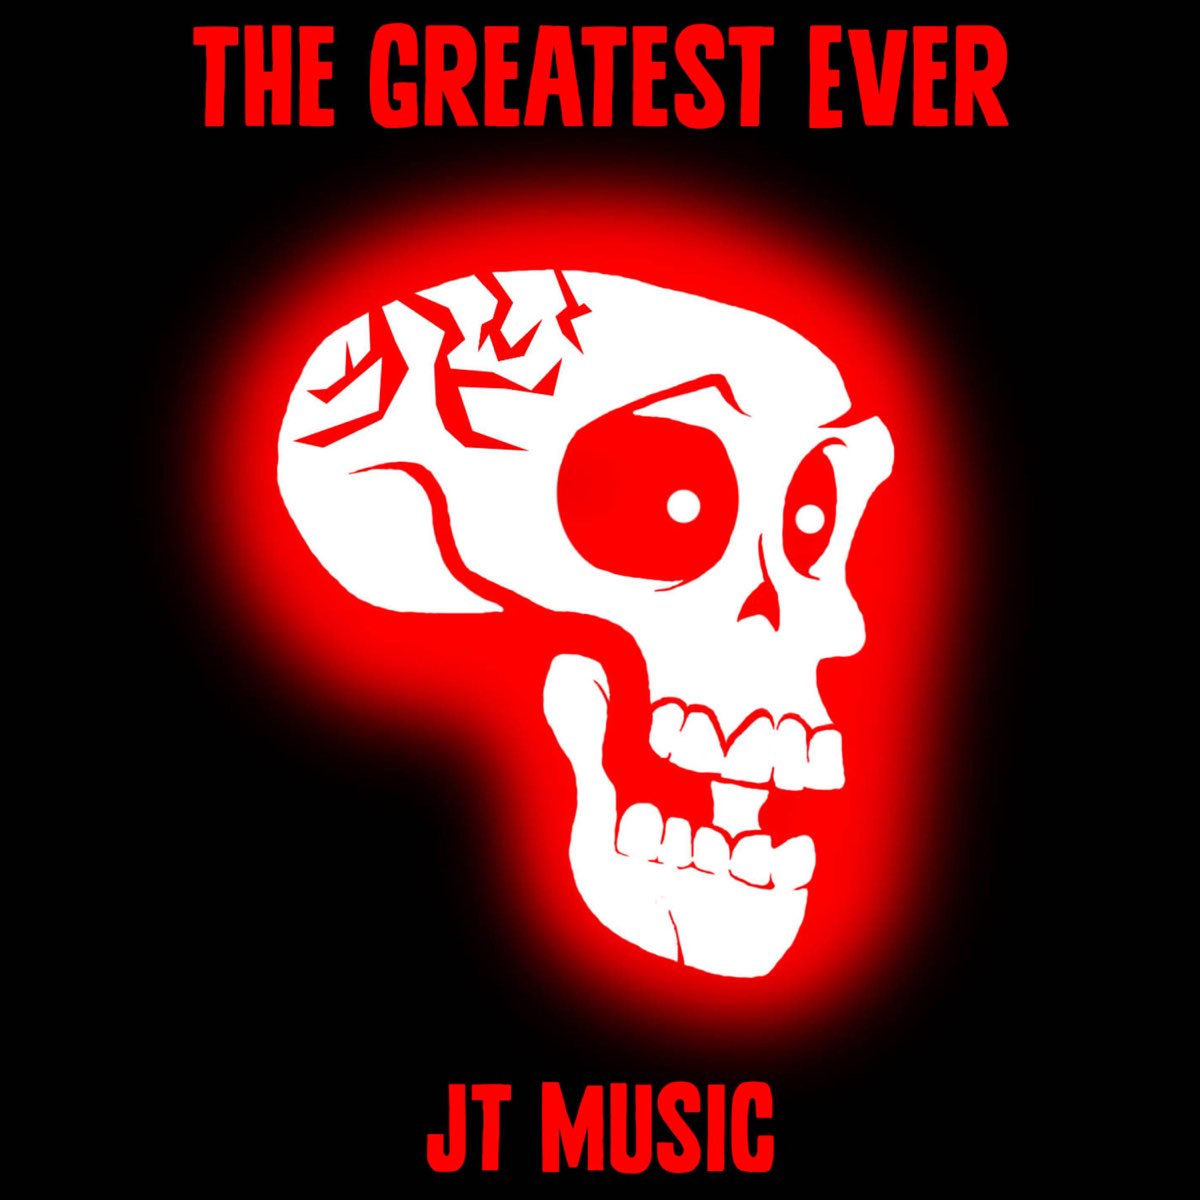 Jt music to the bone